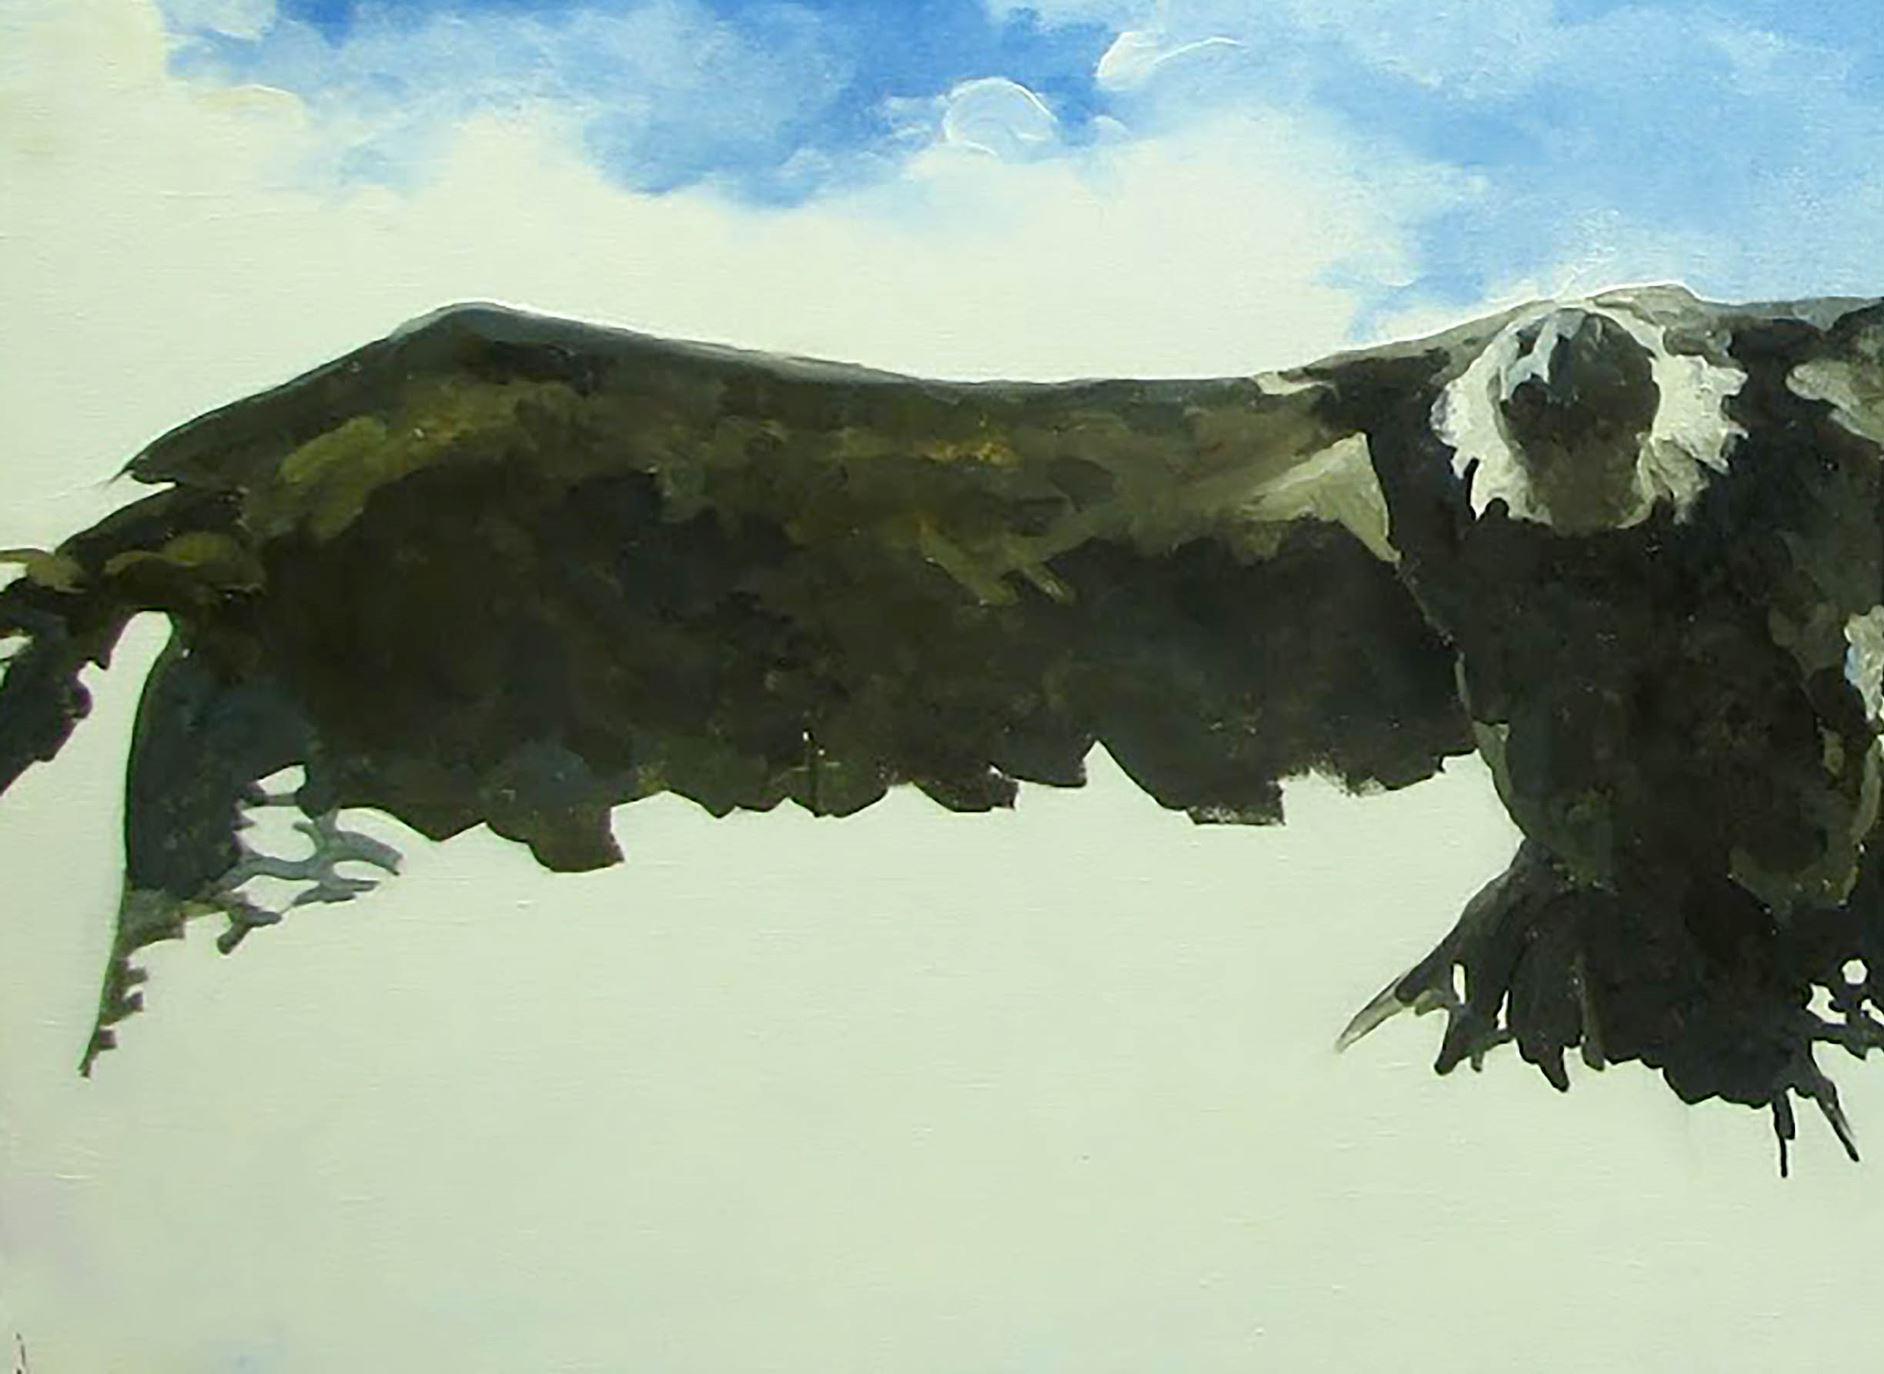 Artist: Varvarov Anatoly Viktorovich
Title: Independent,
Sise: 39.5x59 inches, (100x150 cm)
Medium: Oil on Canvas
Hand painted, original, one of a kind.

This incredible oil paintingfeatures a soaring eagle against a bright blue sky. The clouds in